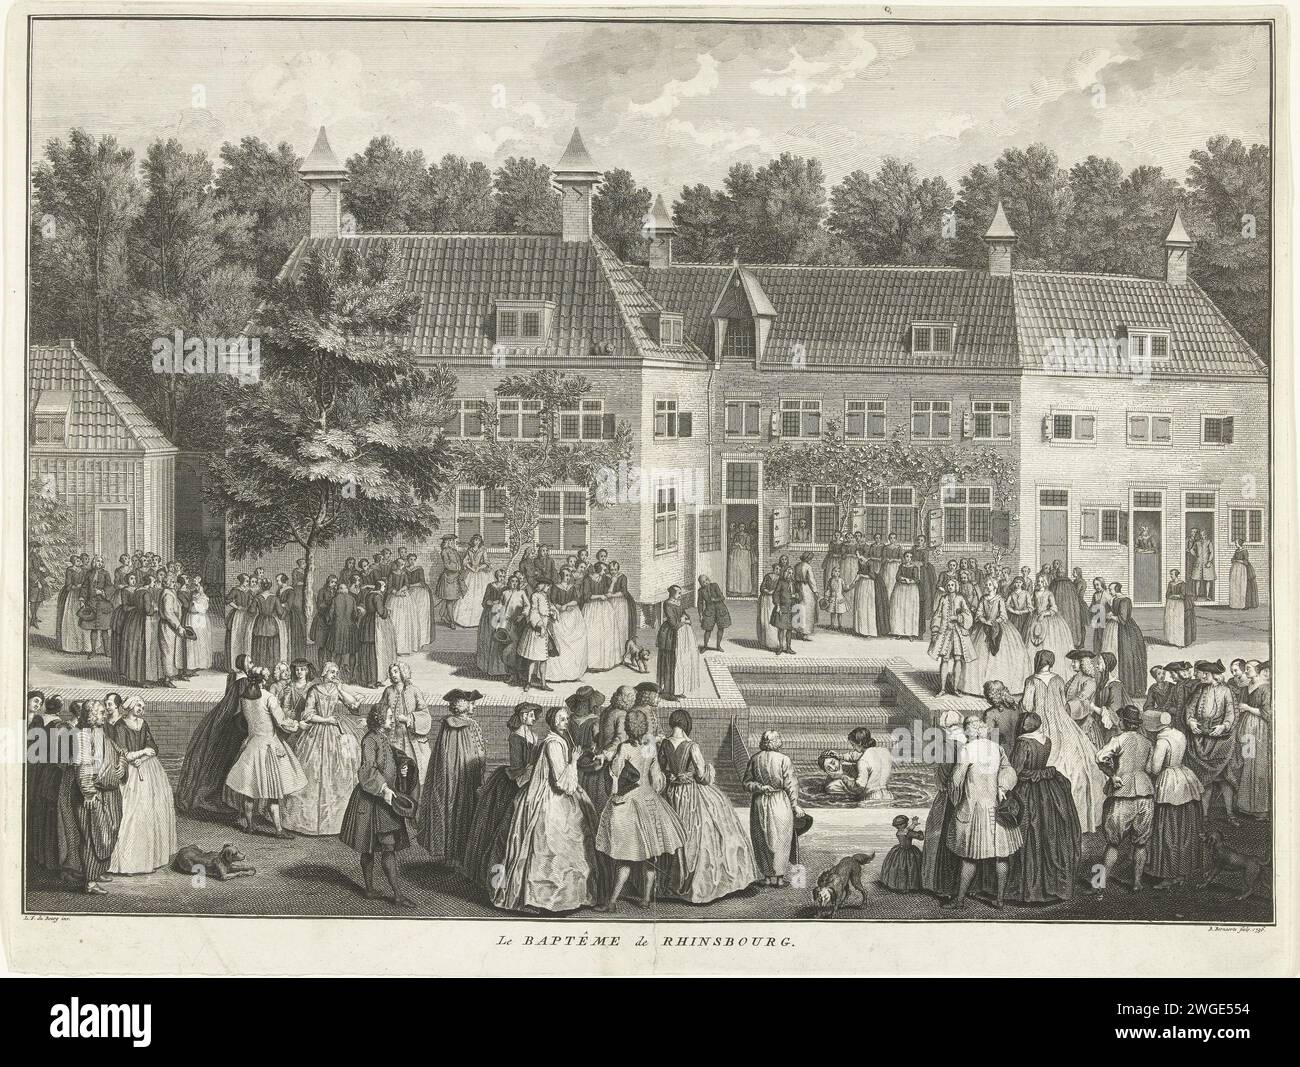 Baptism at the Rijnsburg Collegians, ca. 1735, 1736 print Baptismal ceremony at the Rijnsburg Colleagues, ca. 1735. Baptism by immersion of adults in a canal around the large house, attended by the members of the municipality. Northern Netherlands paper etching / engraving Baptism  Protestant service Rijnsburg Stock Photo